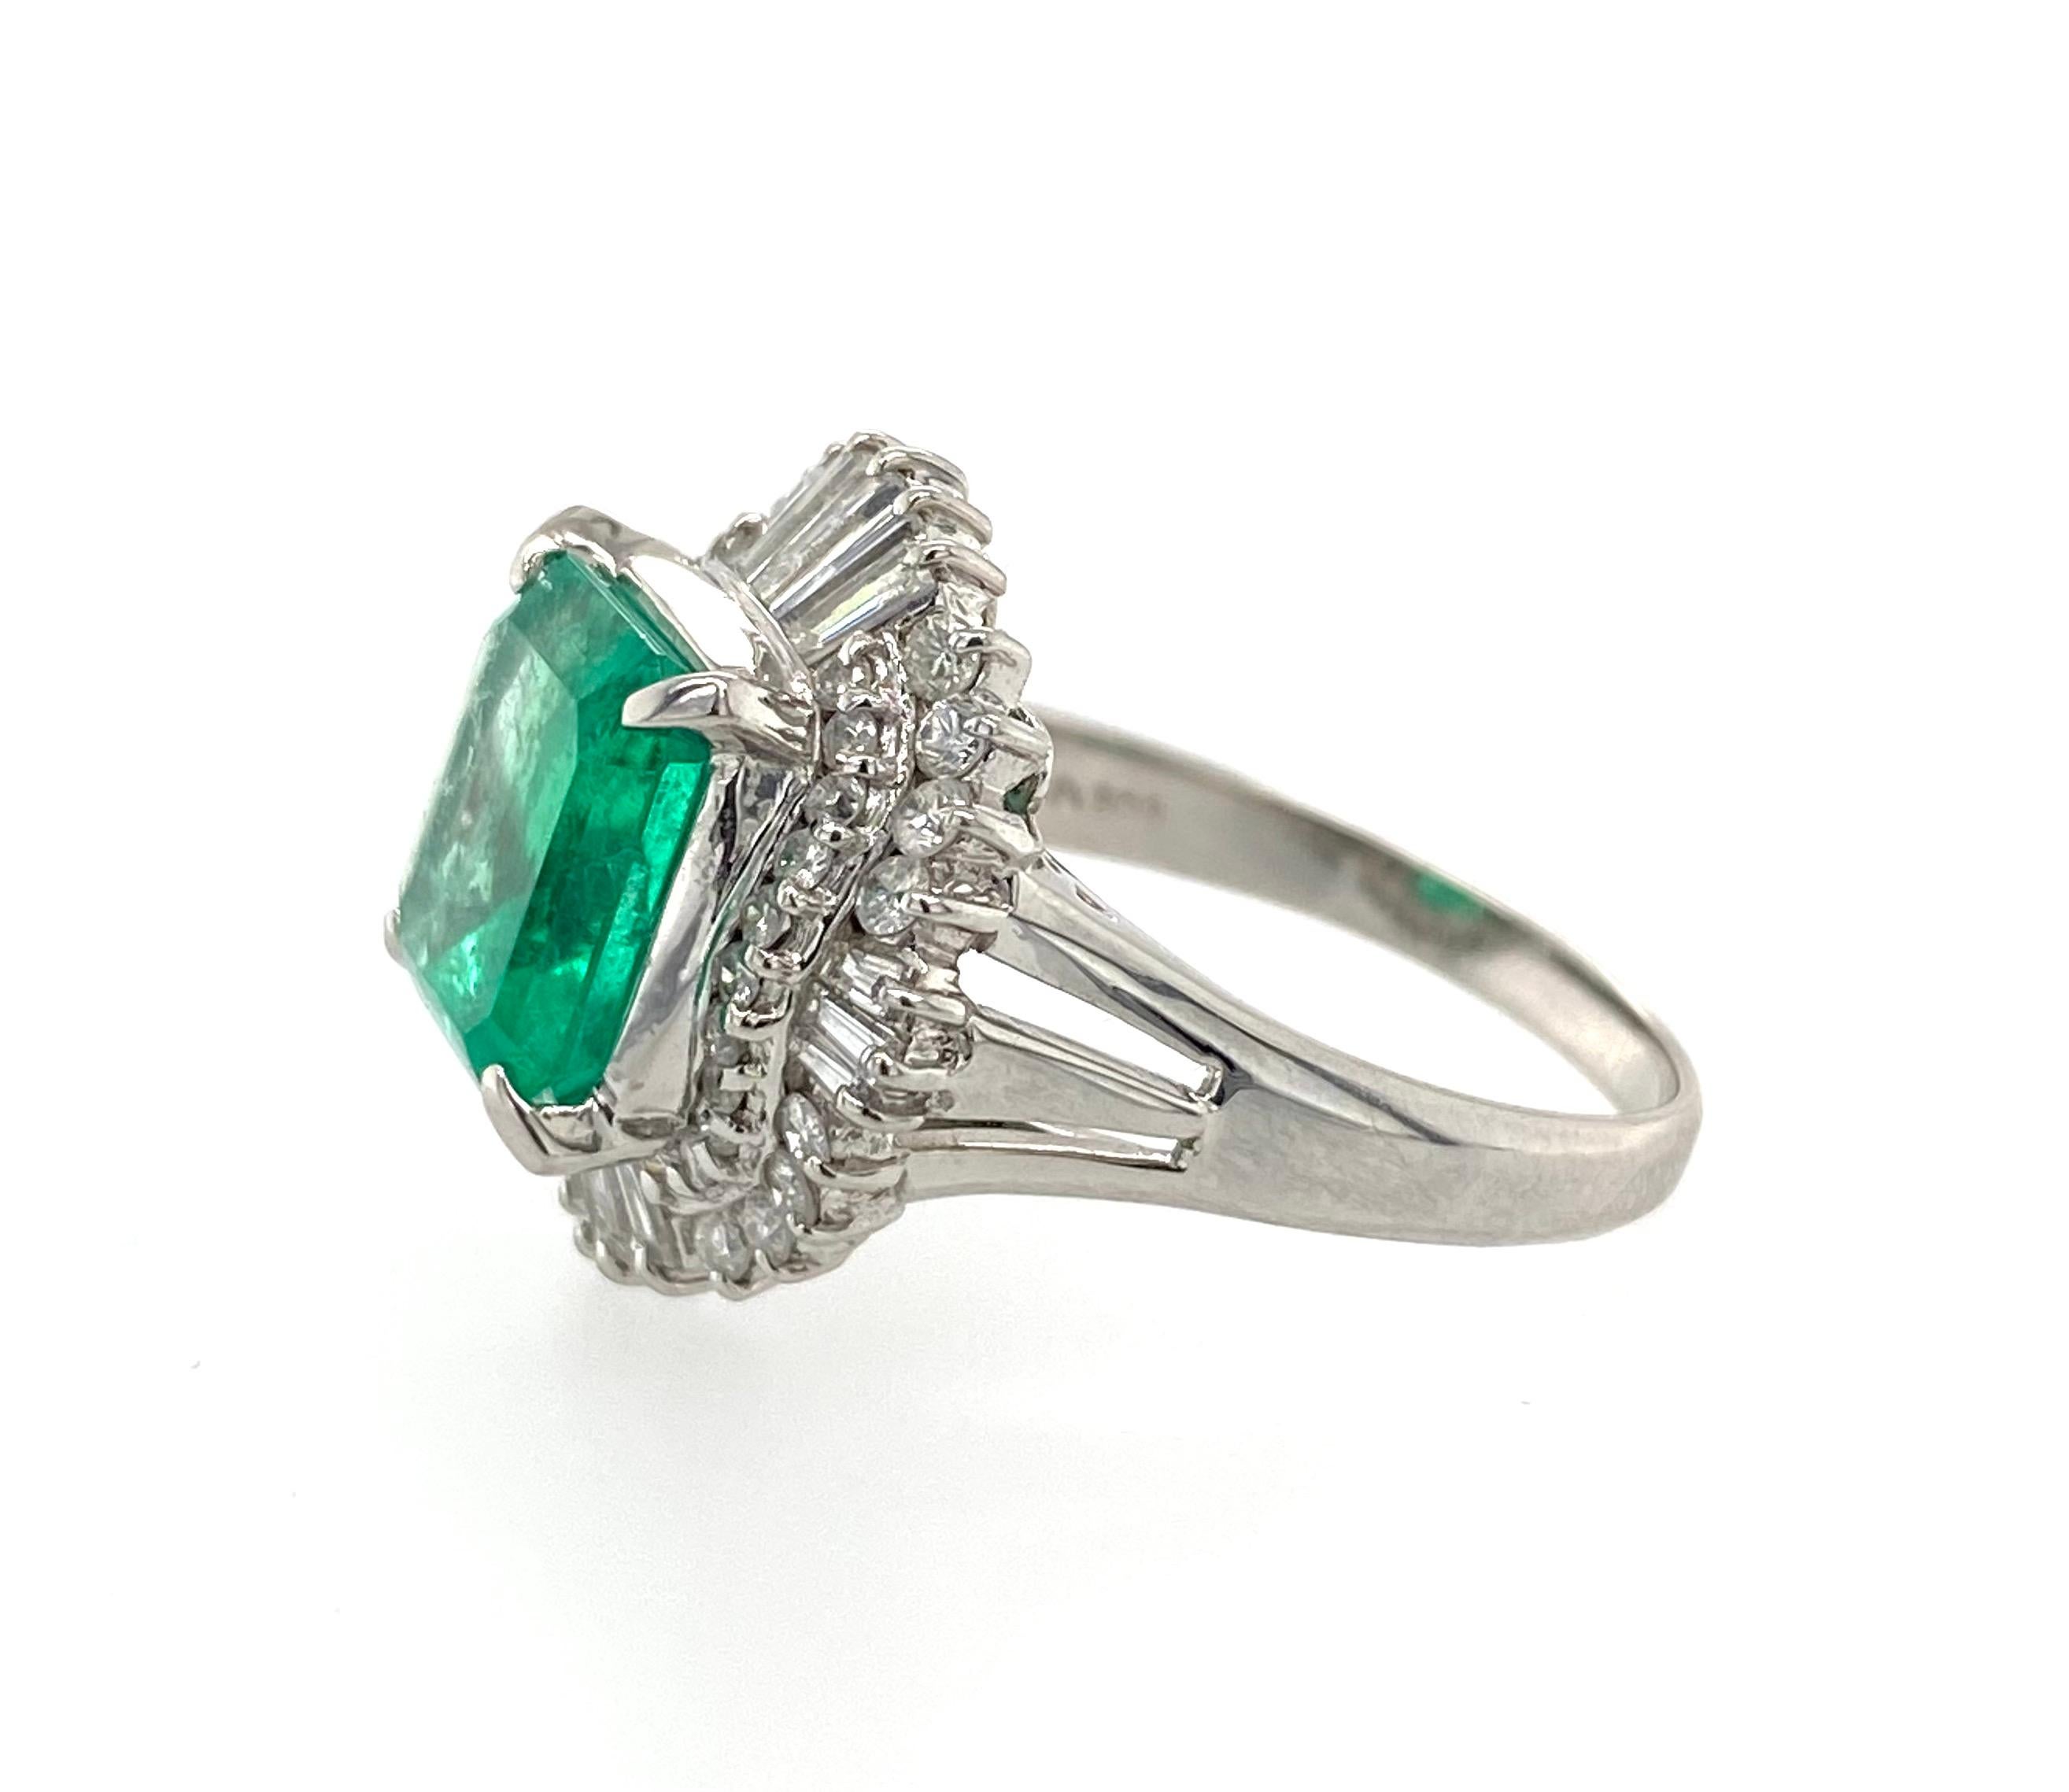 This estate ring is a stunning piece of jewelry that features a 3.53 carat Colombian emerald as its centerpiece. The emerald is set in a platinum band and is accompanied by 0.95 carats of sparkling diamonds. The combination of the rich green emerald